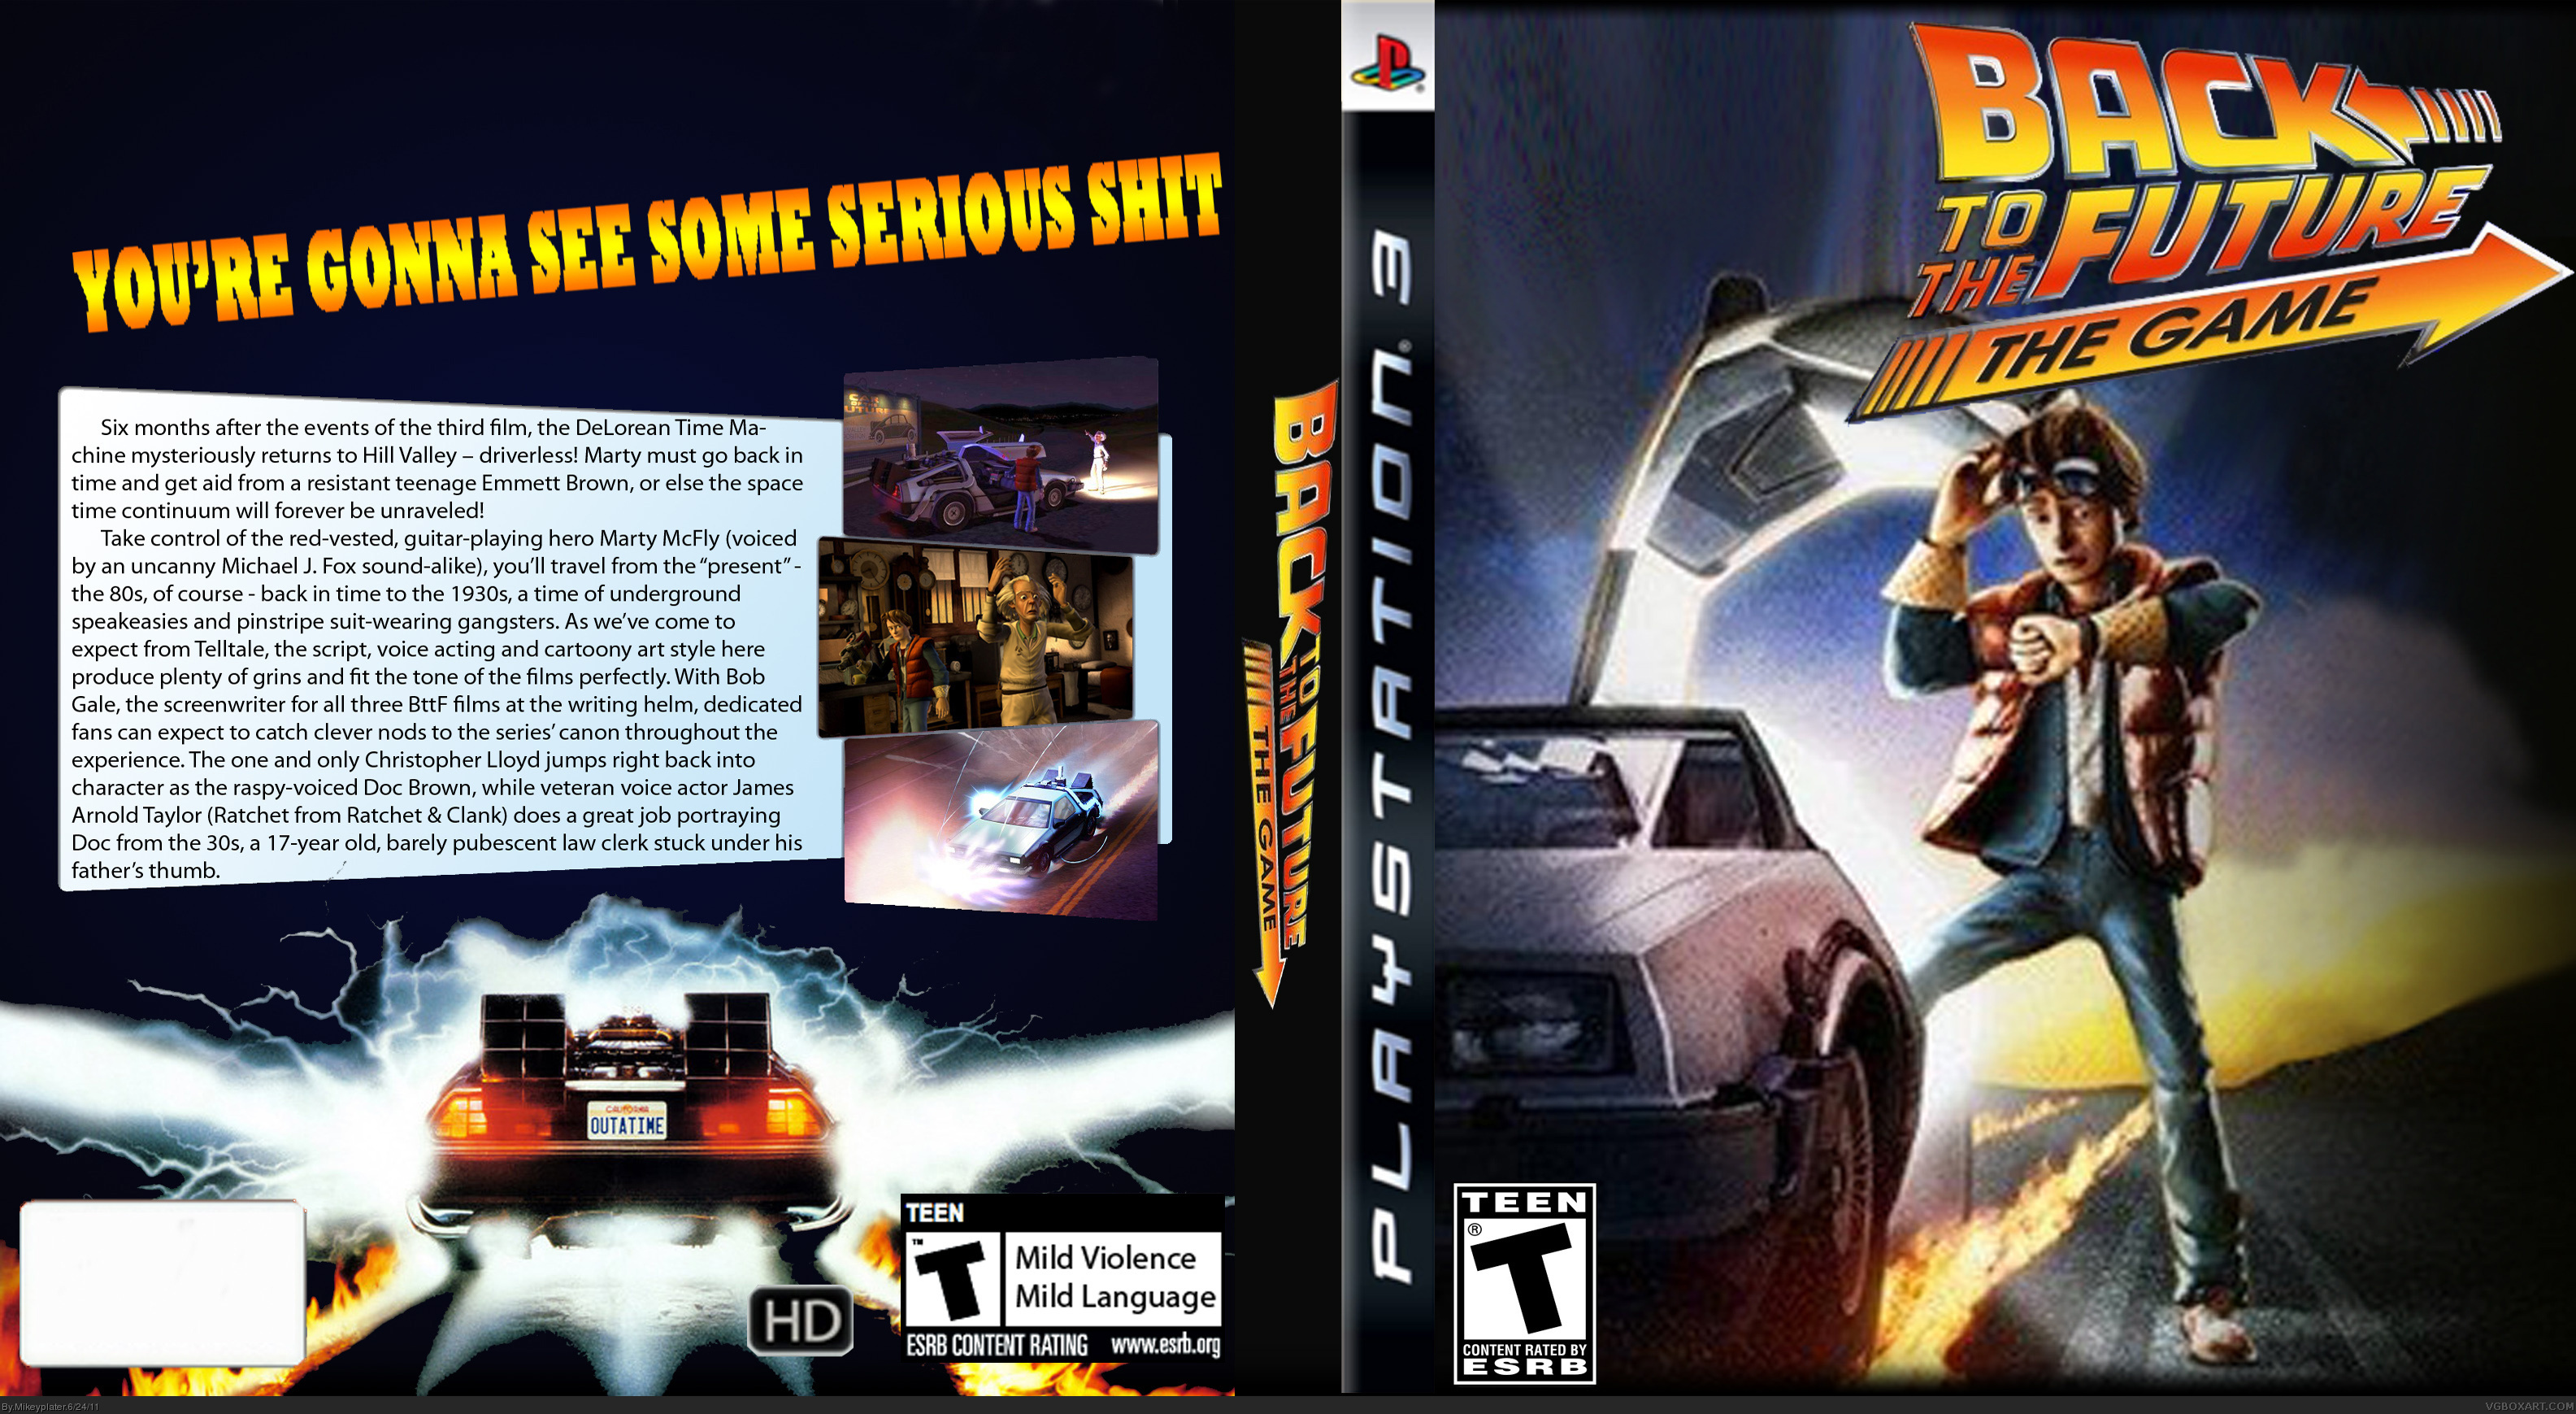 Back To The Future: The Video Game box cover